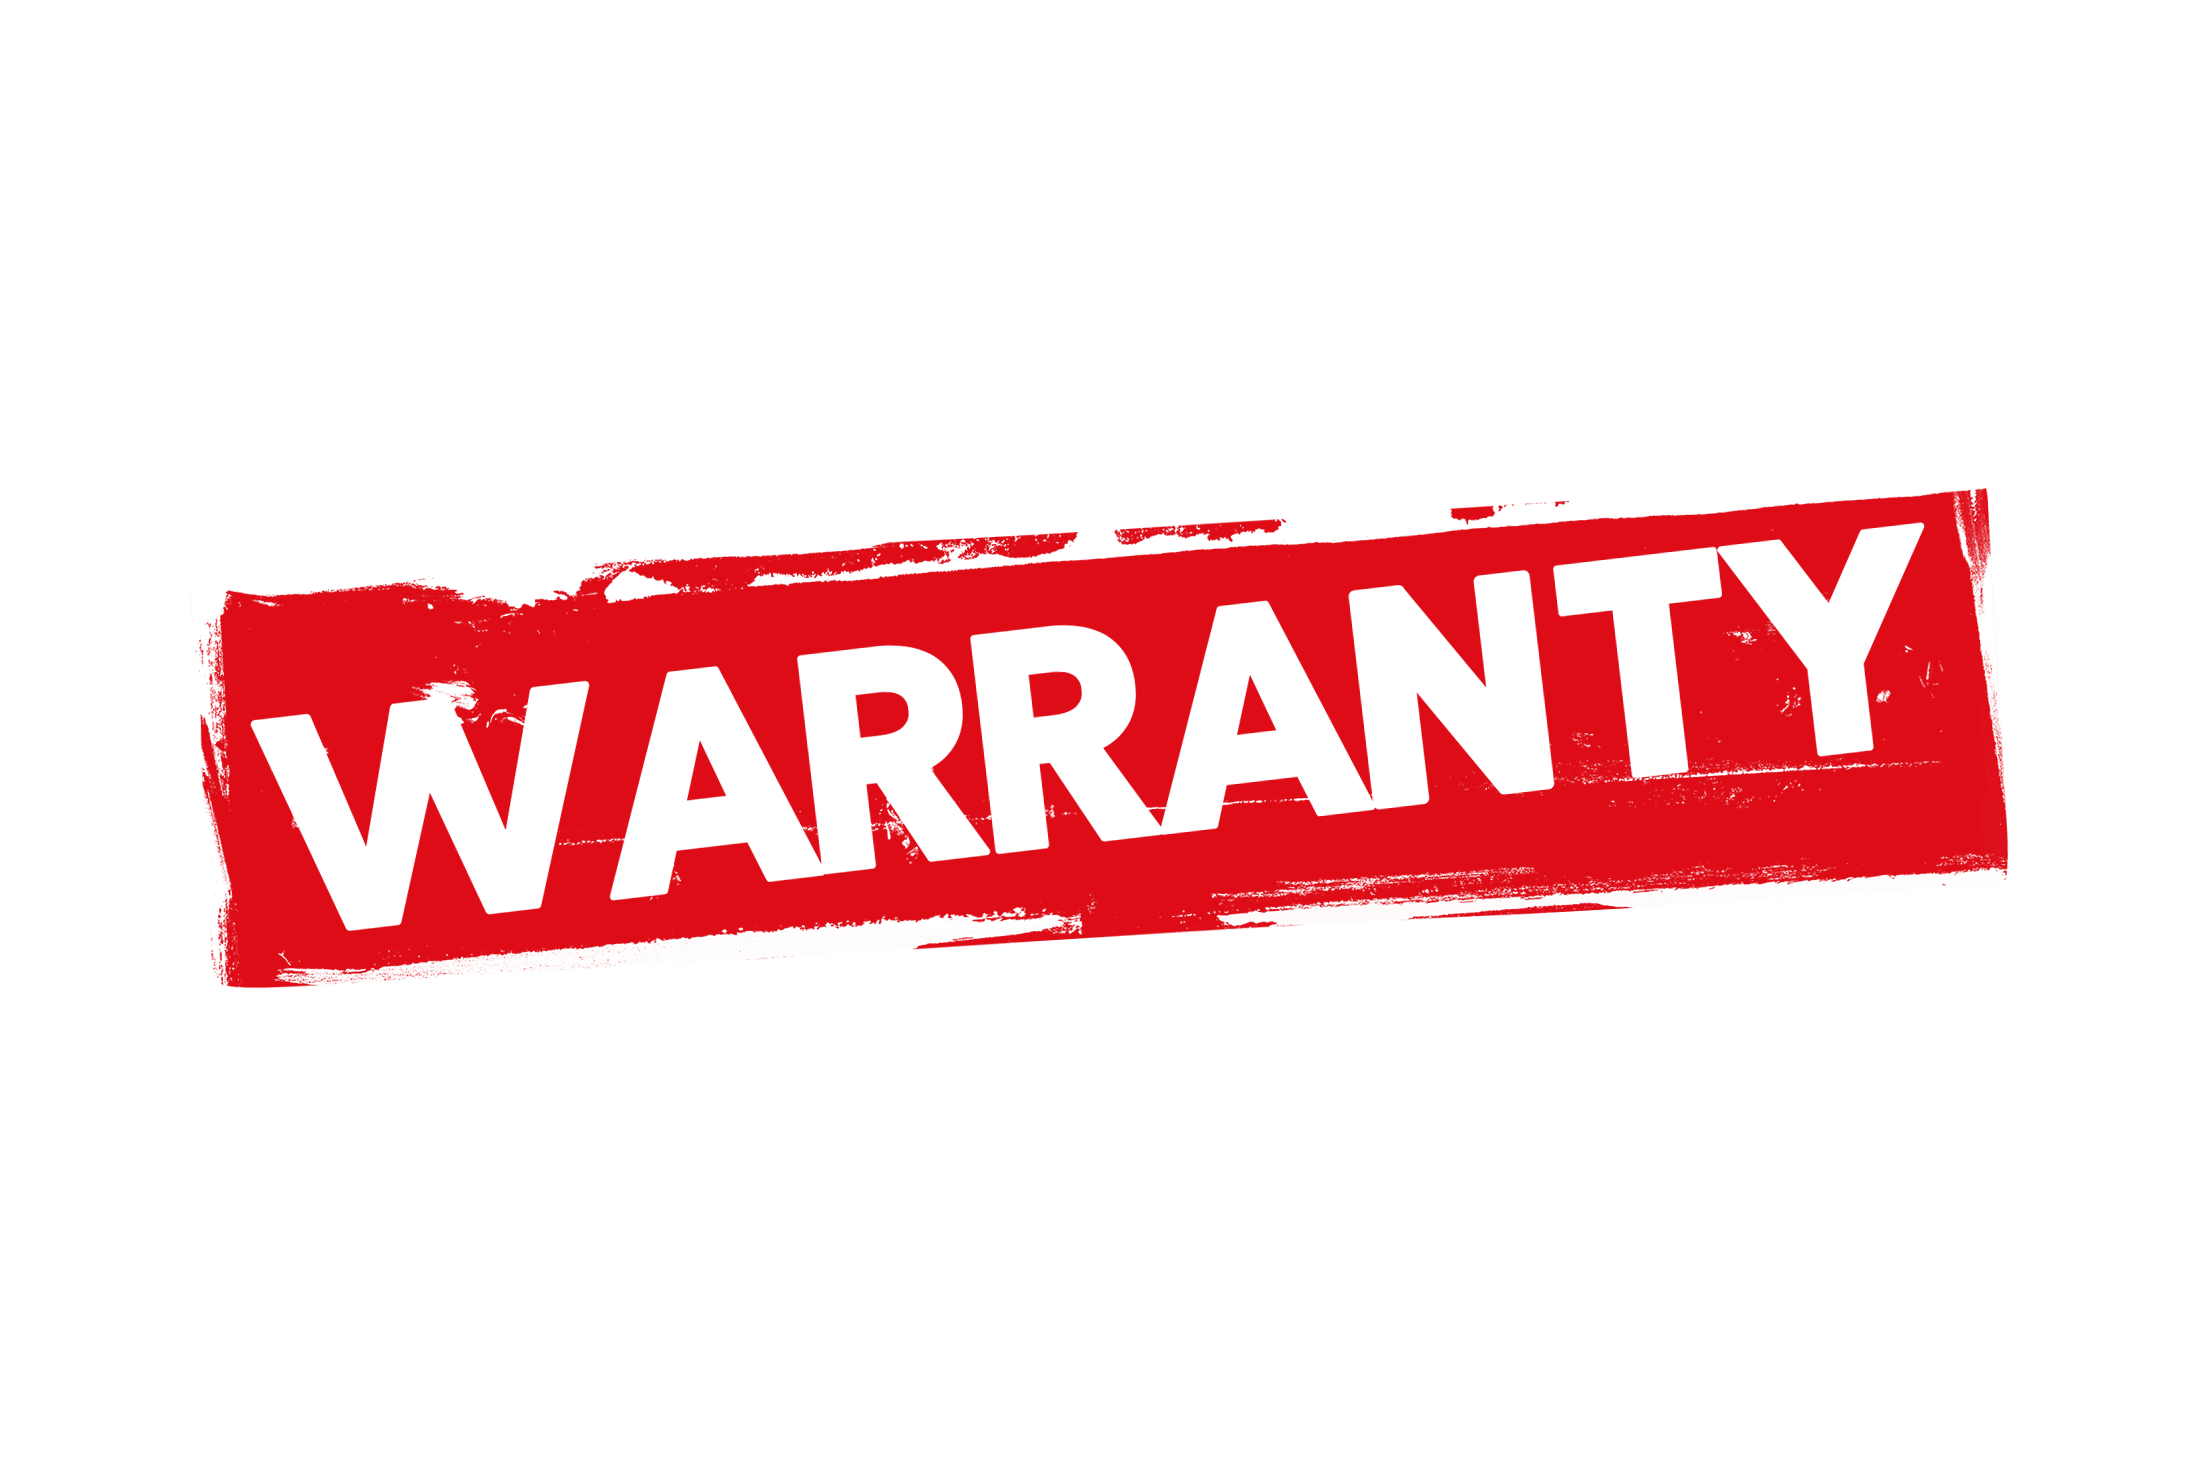 Grunge warranty label PNG and PSD